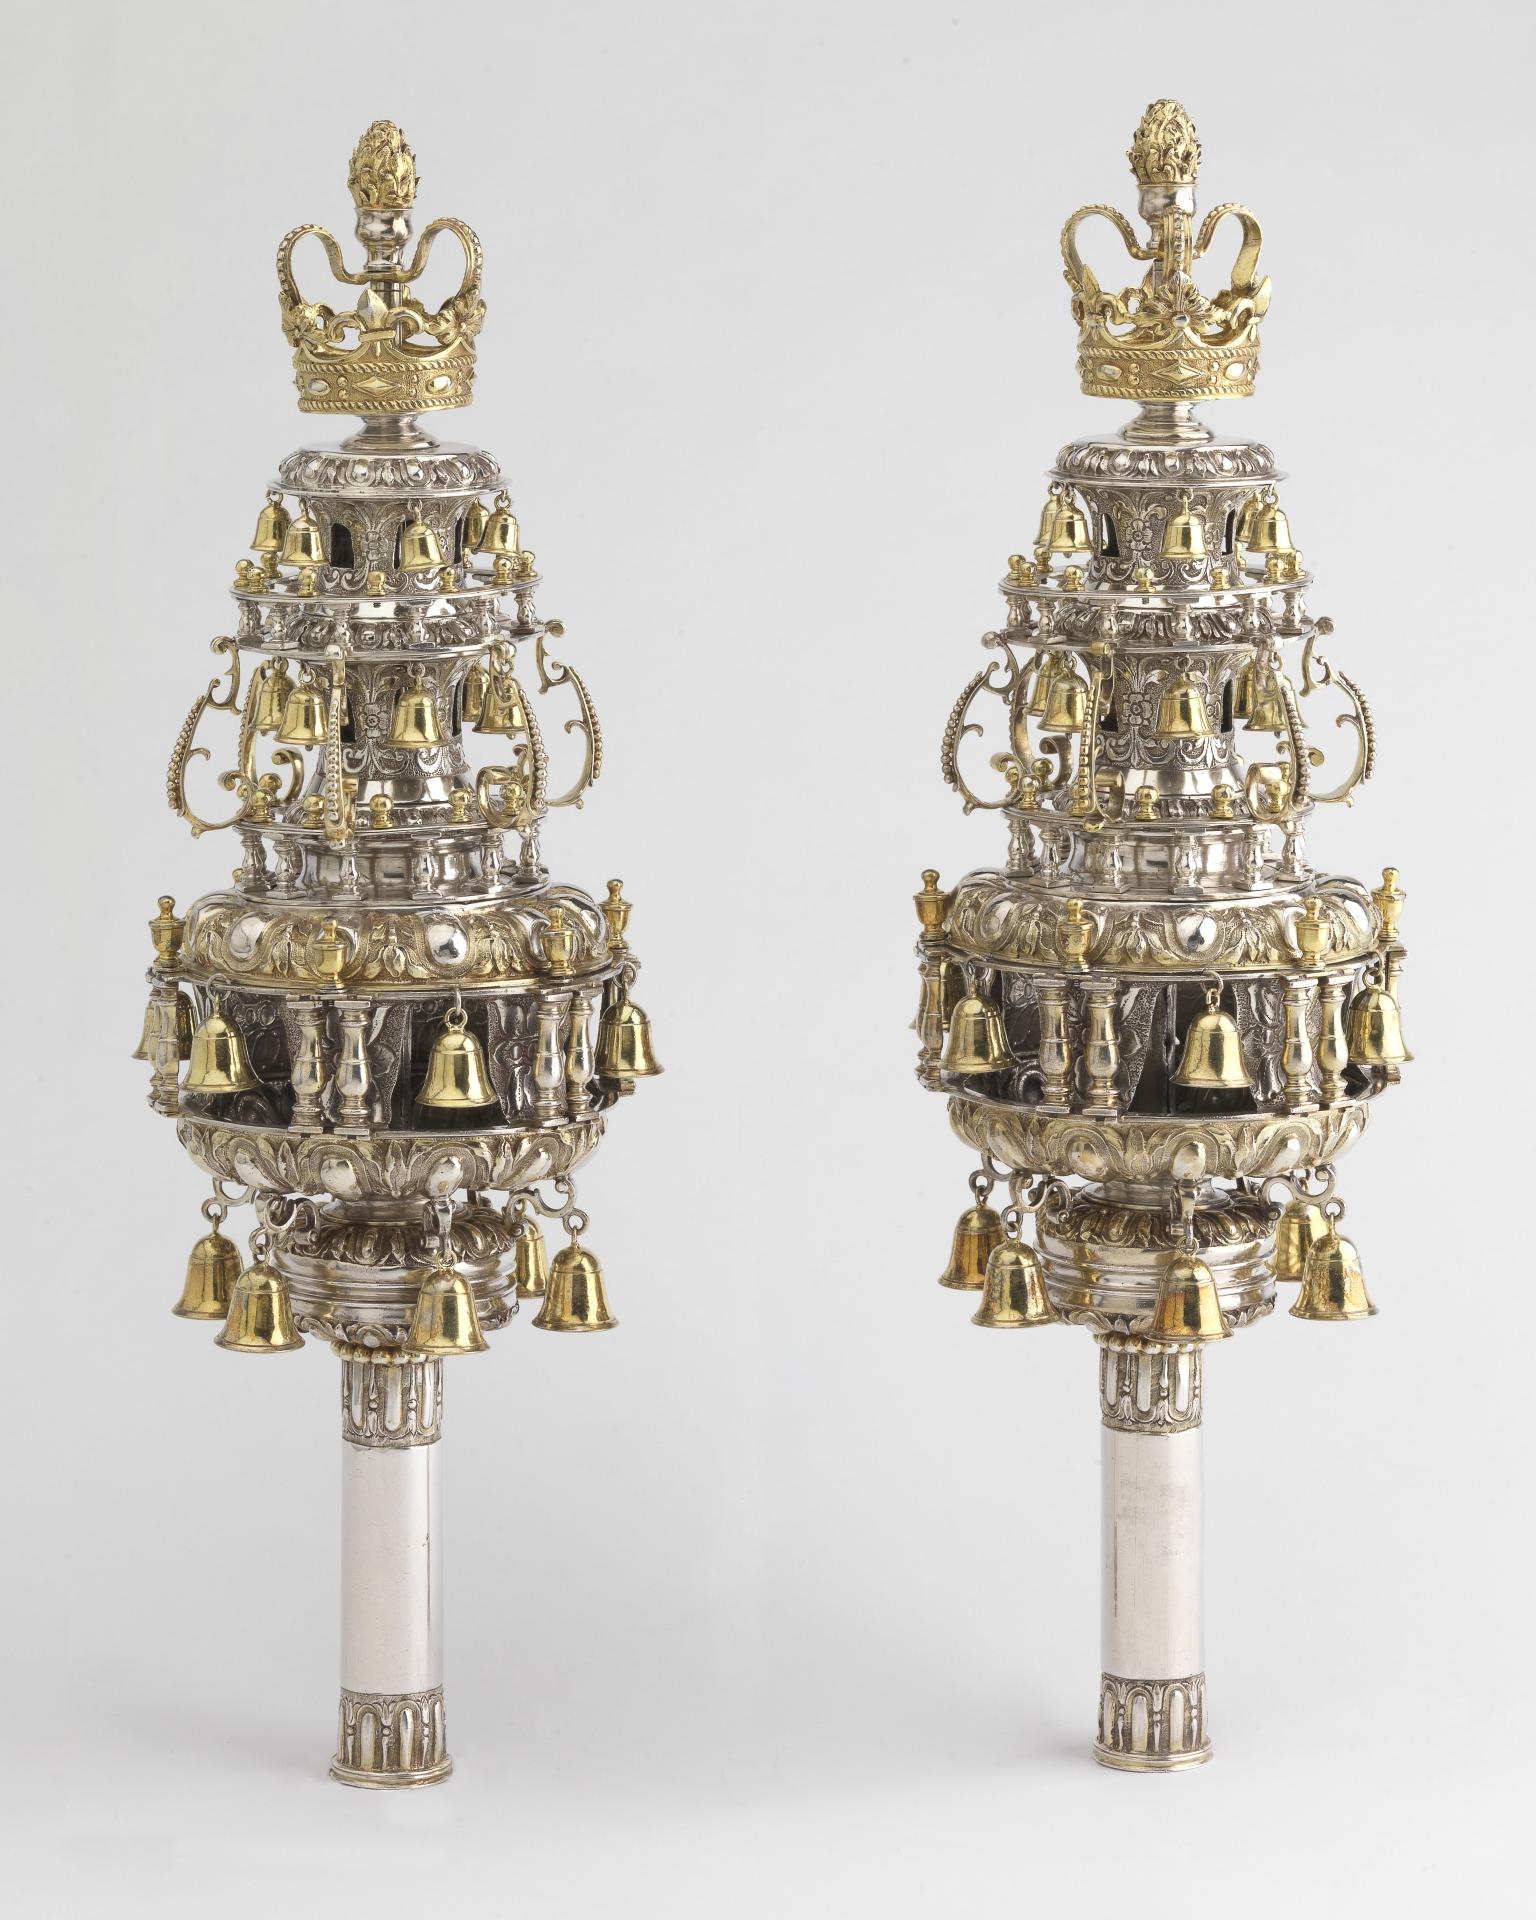 Finials with many layers of branches with bells and topped with crowns.